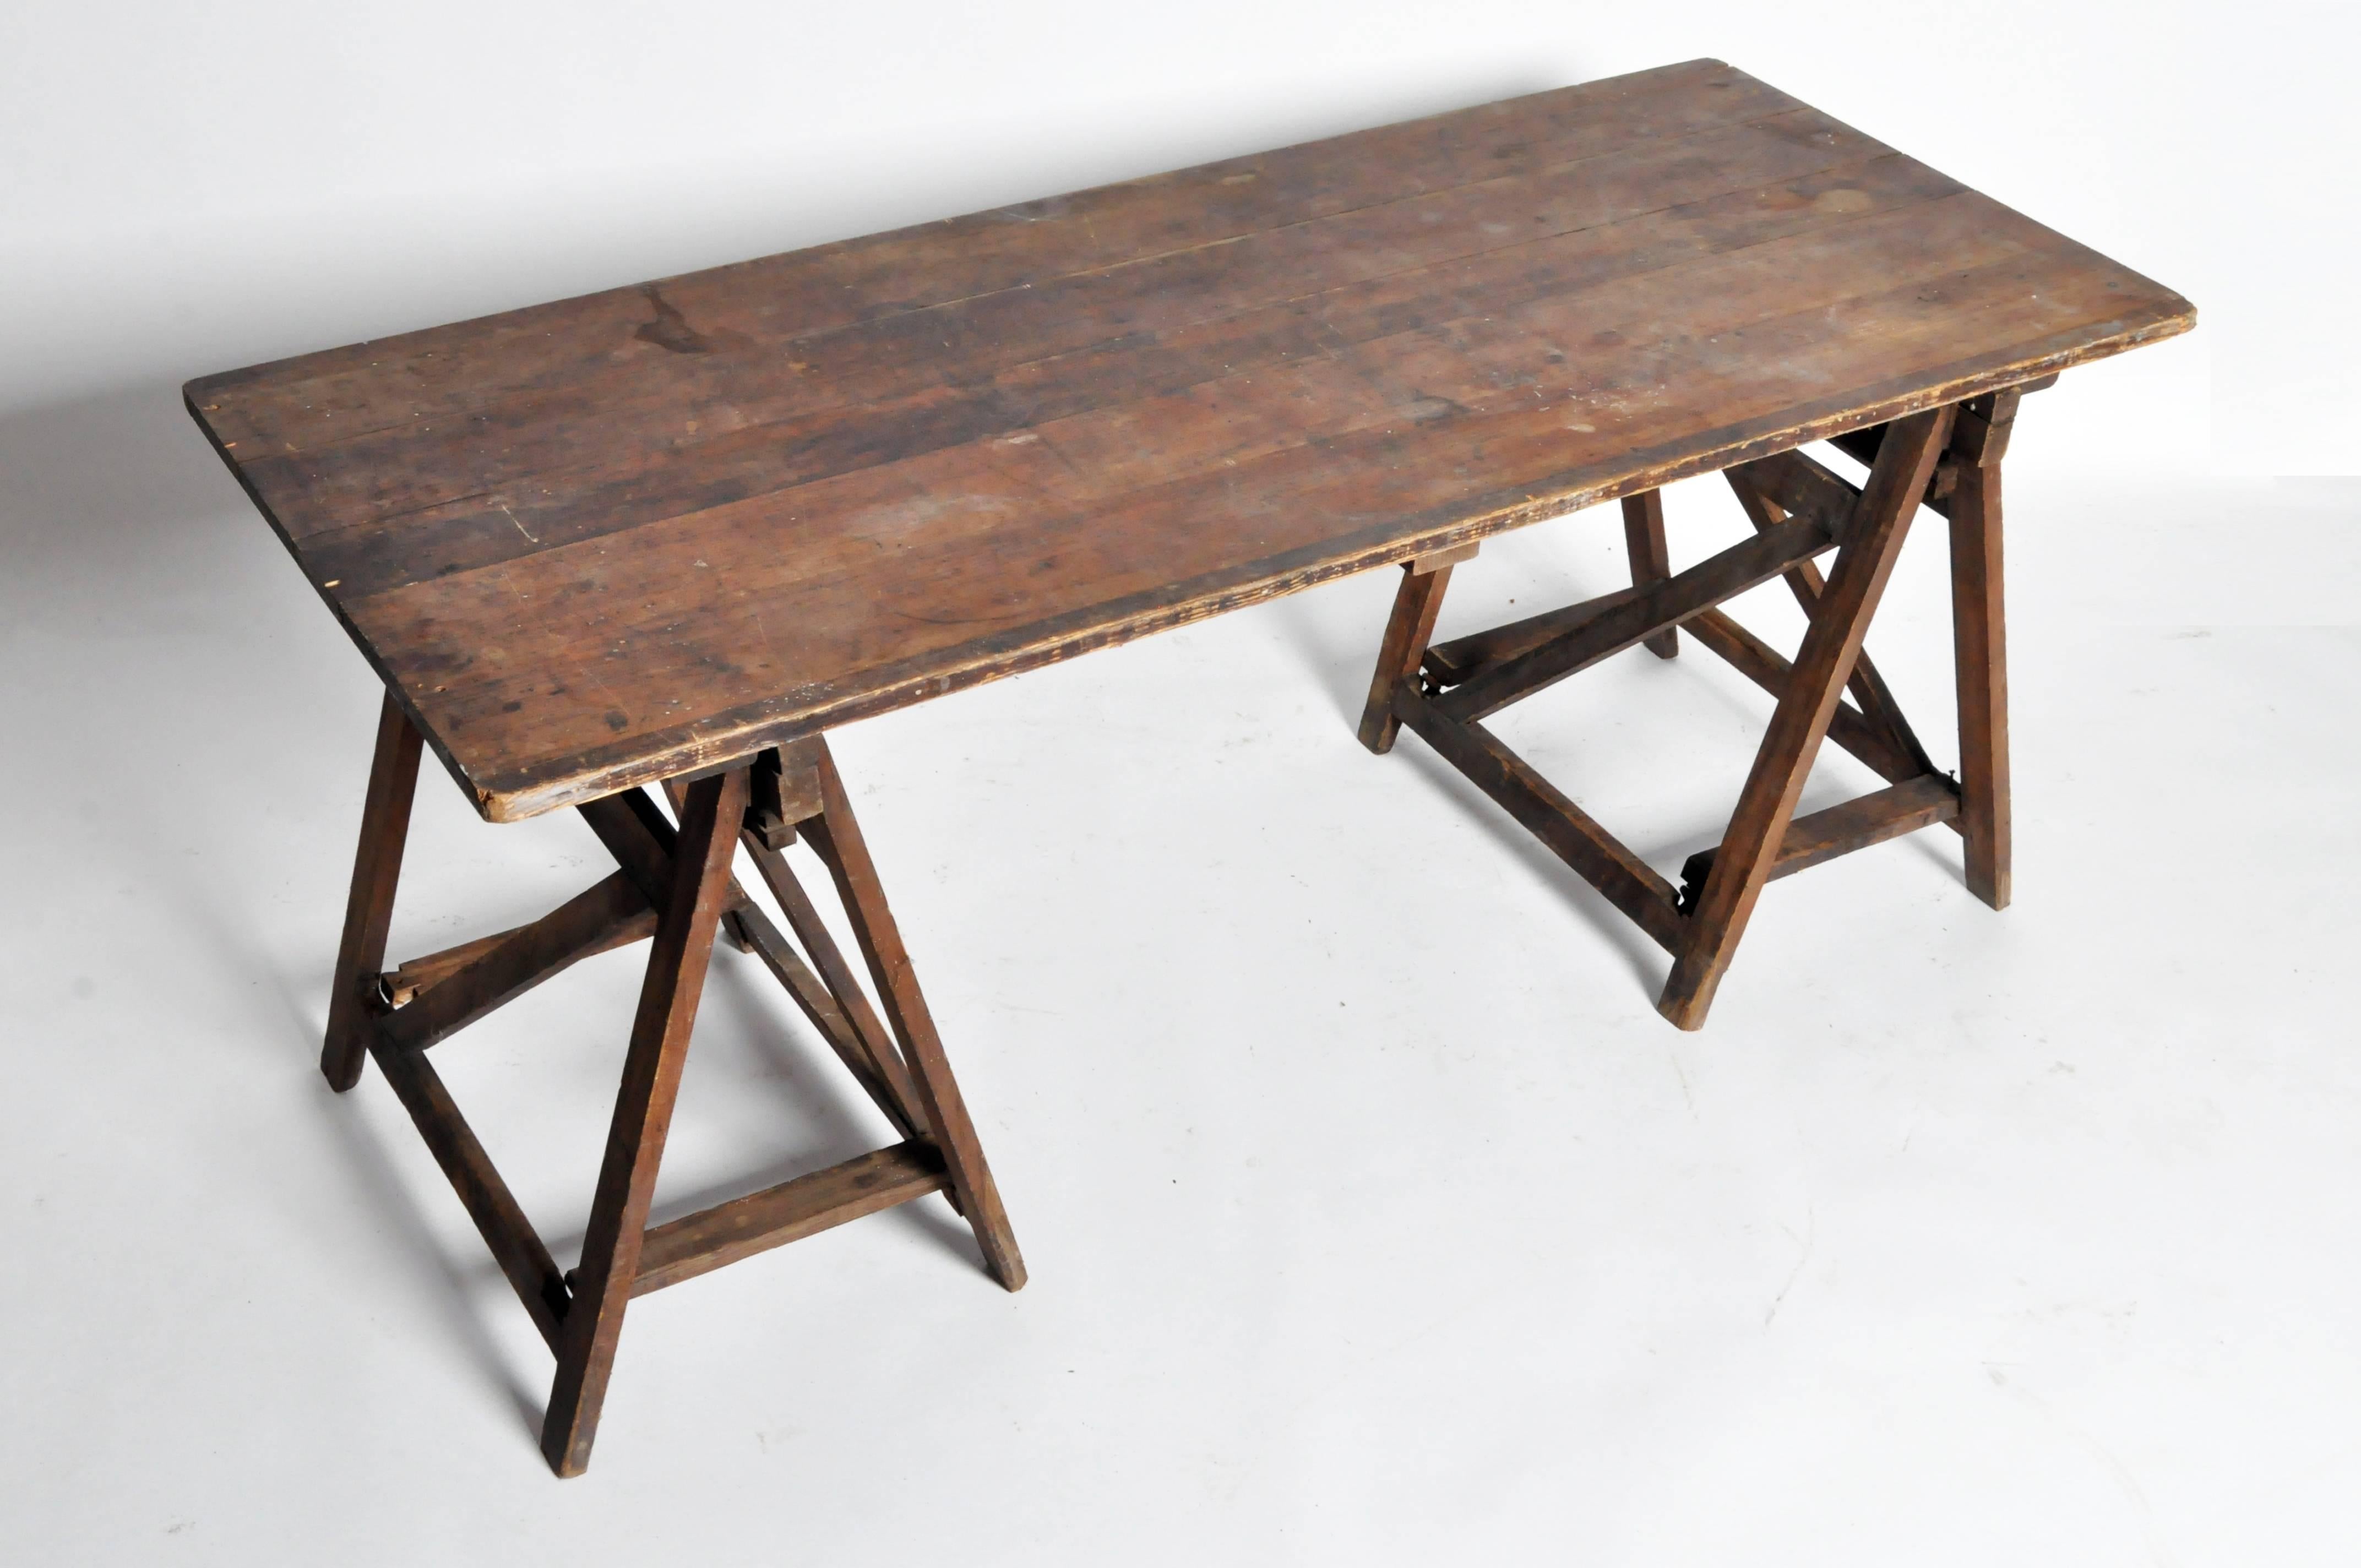 This trestle table is from France and is made from pinewood. The table comes in three pieces the top and the two leg bases. The tables a beautiful aged patina.